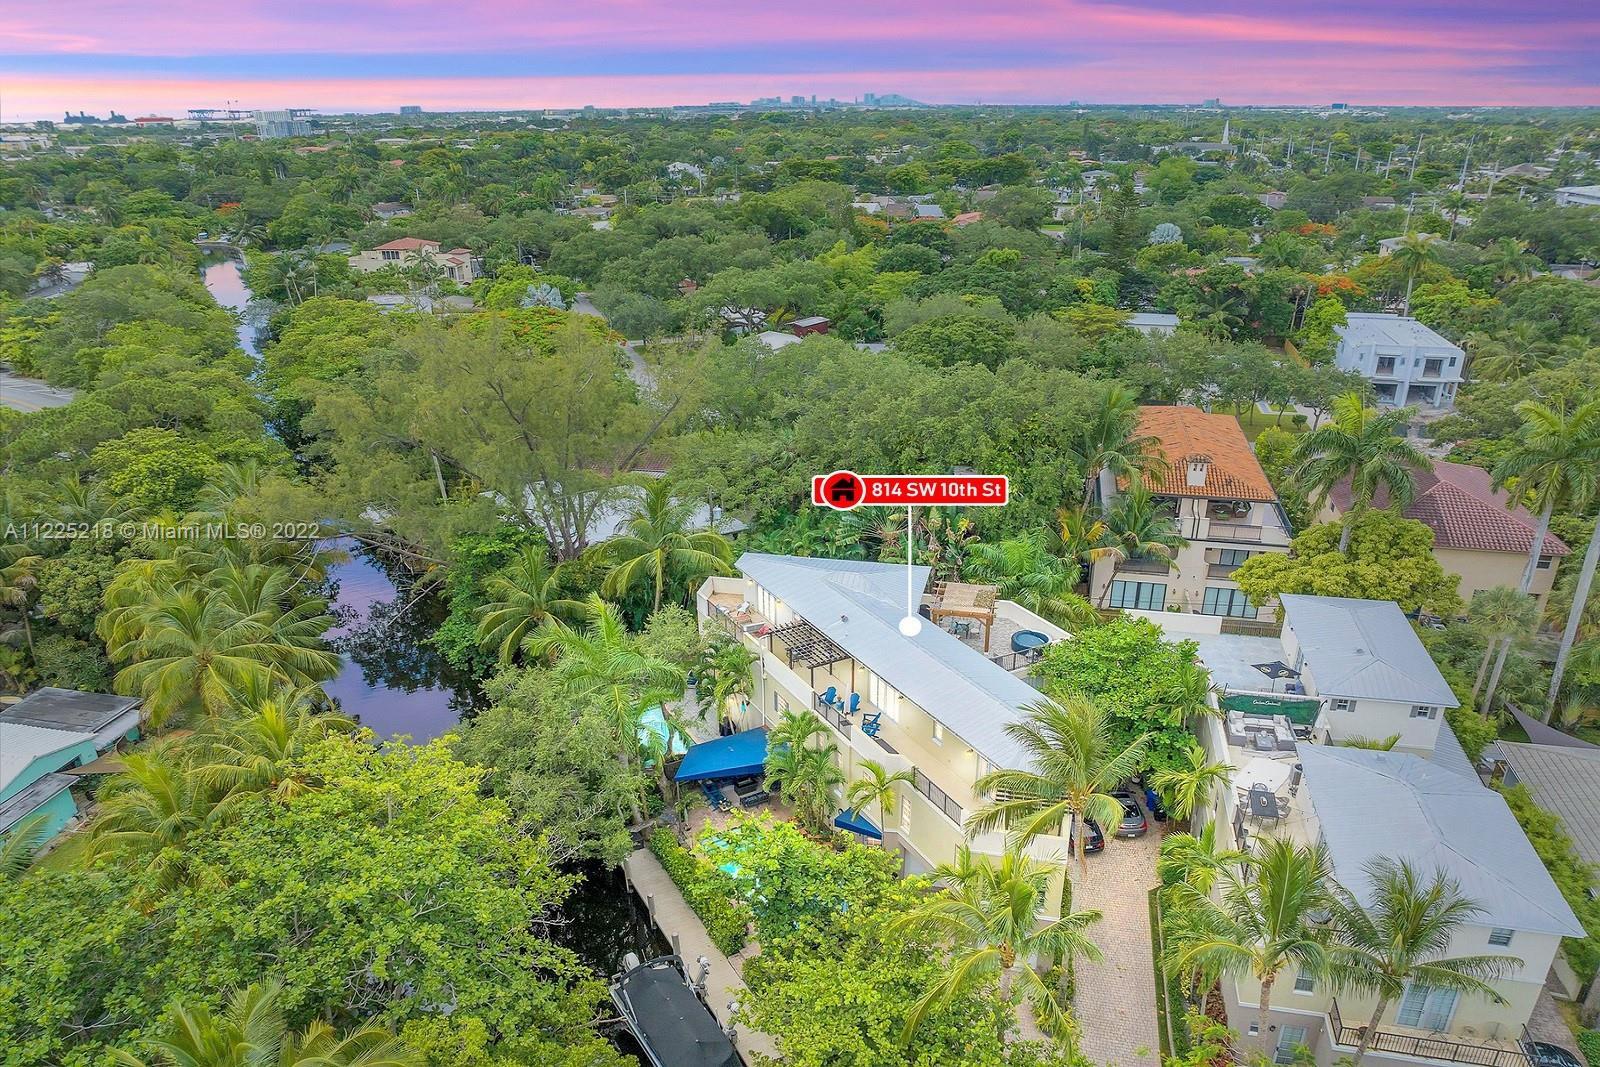 SPECTACULAR ONE-OF-A KIND TARPON RIVER TOWNHOME SITUATED ON AN ULTRA PREMIUM, SERENE & PRIVATE CUL D